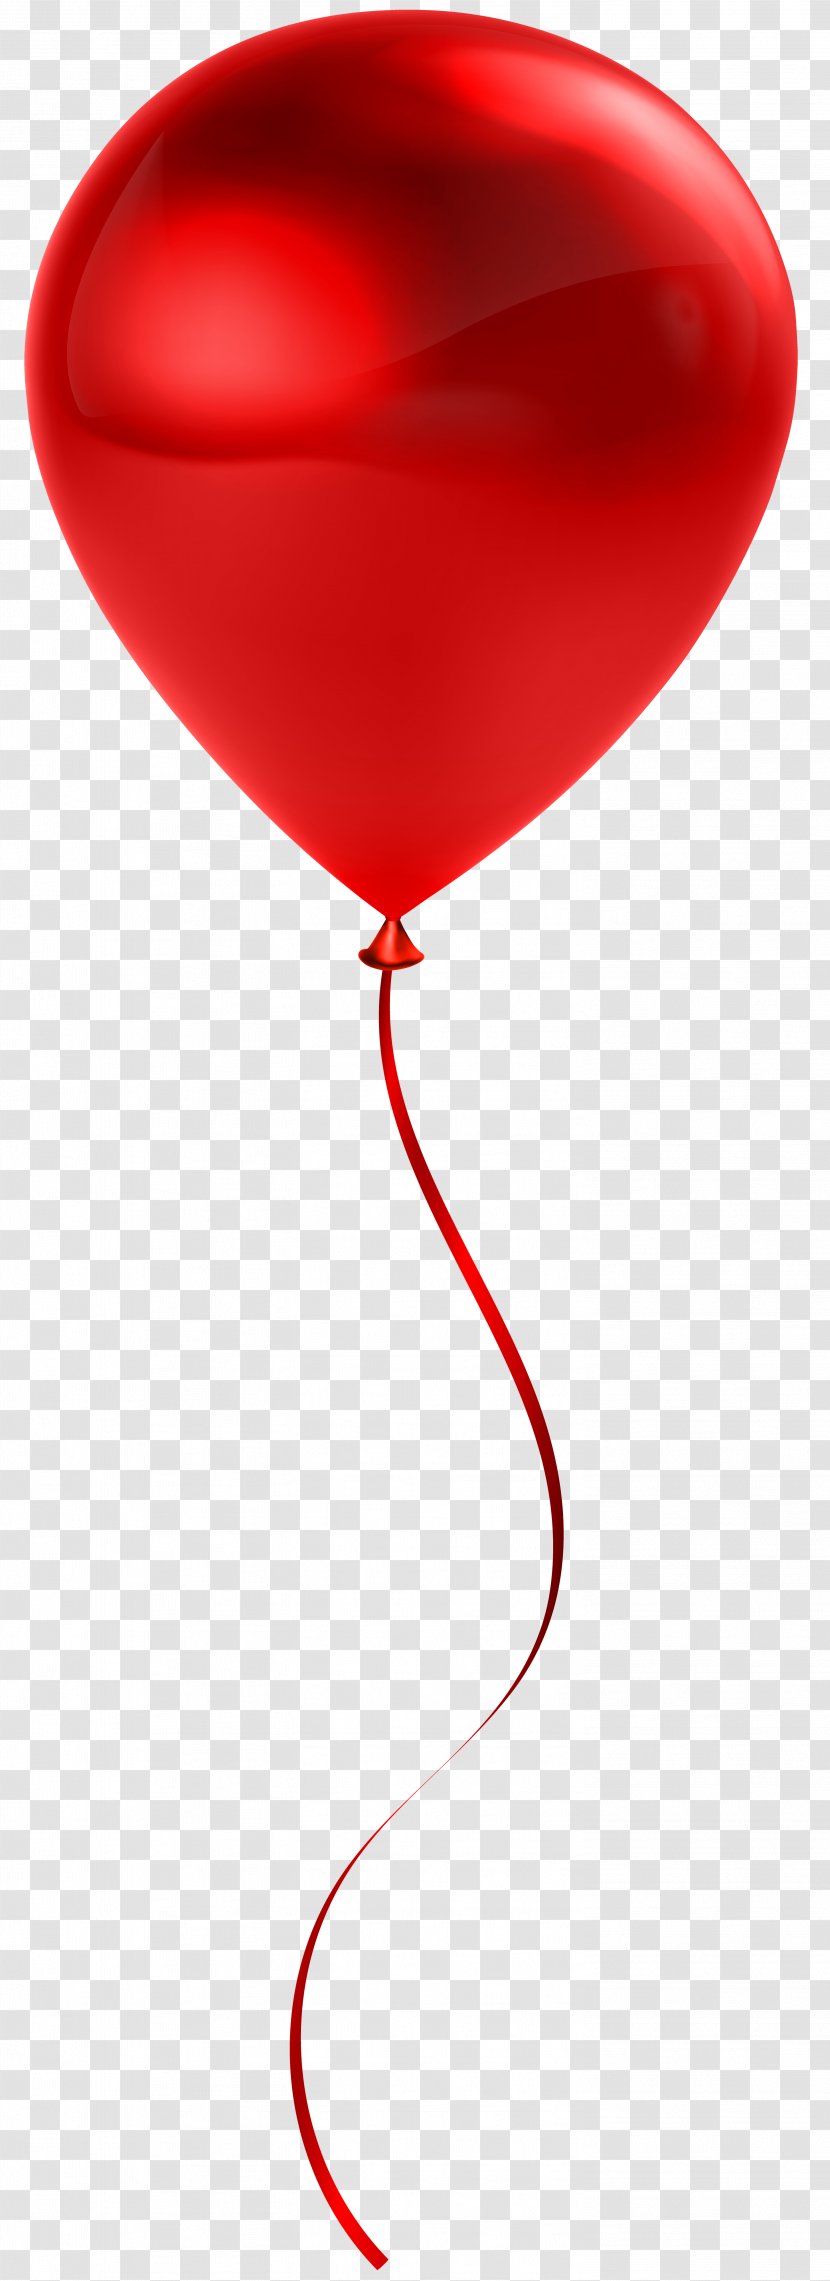 Balloon Red Clip Art - Toy - BALLOM Transparent PNG